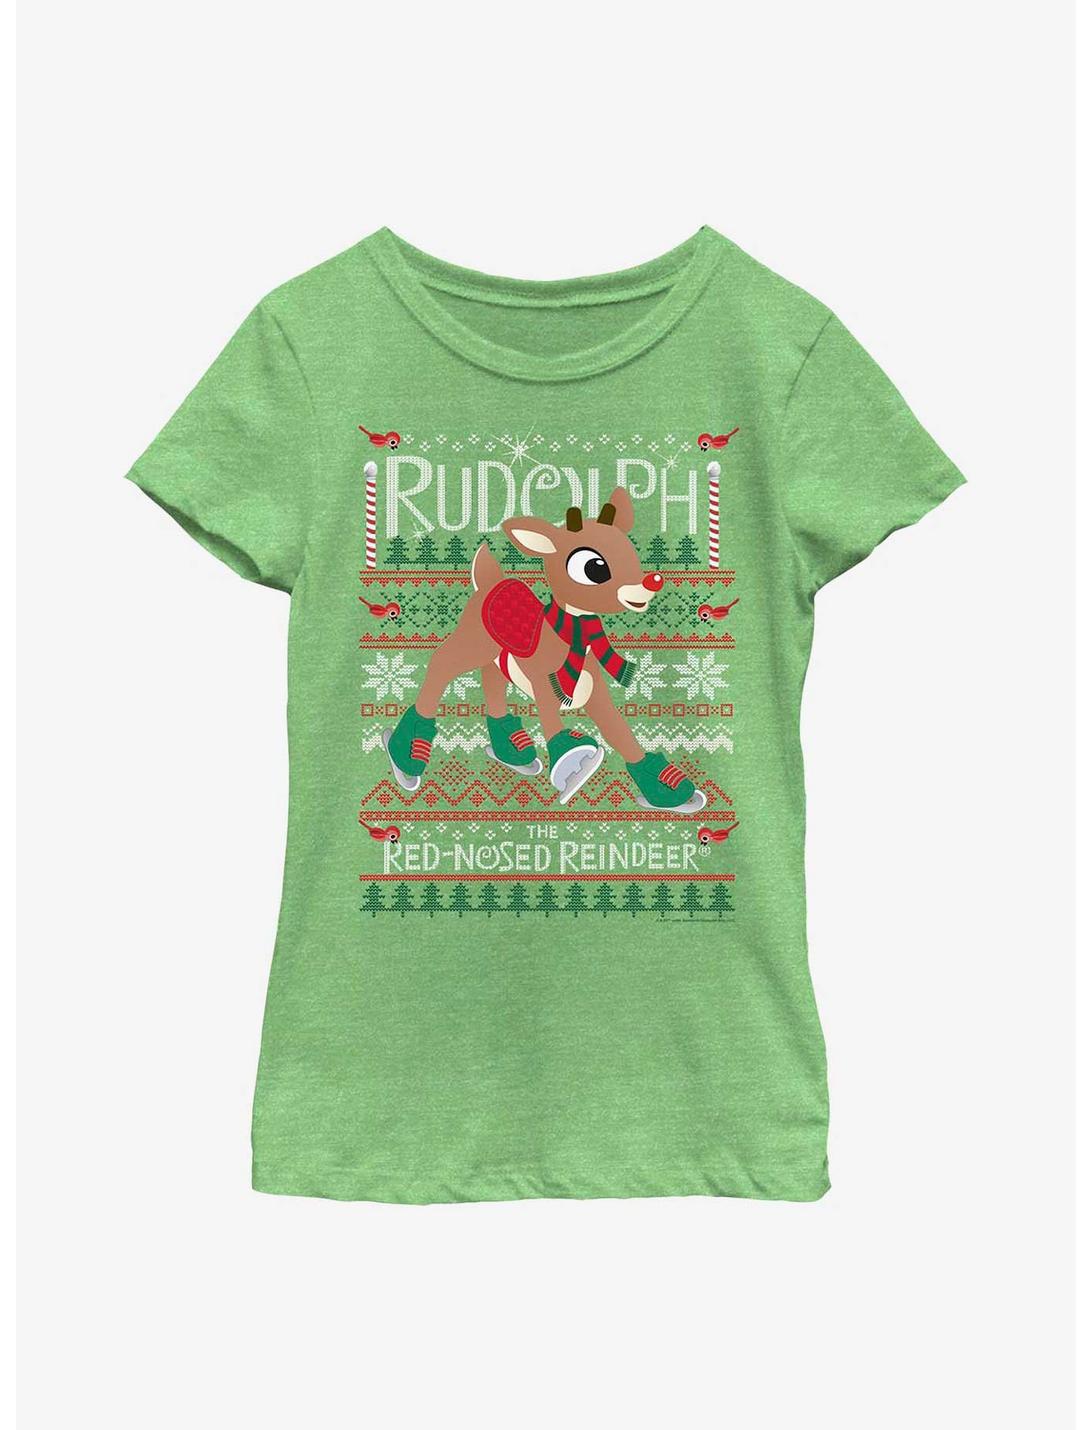 Rudolph The Red-Nosed Reindeer Ugly Sweater Youth Girls T-Shirt, GRN APPLE, hi-res